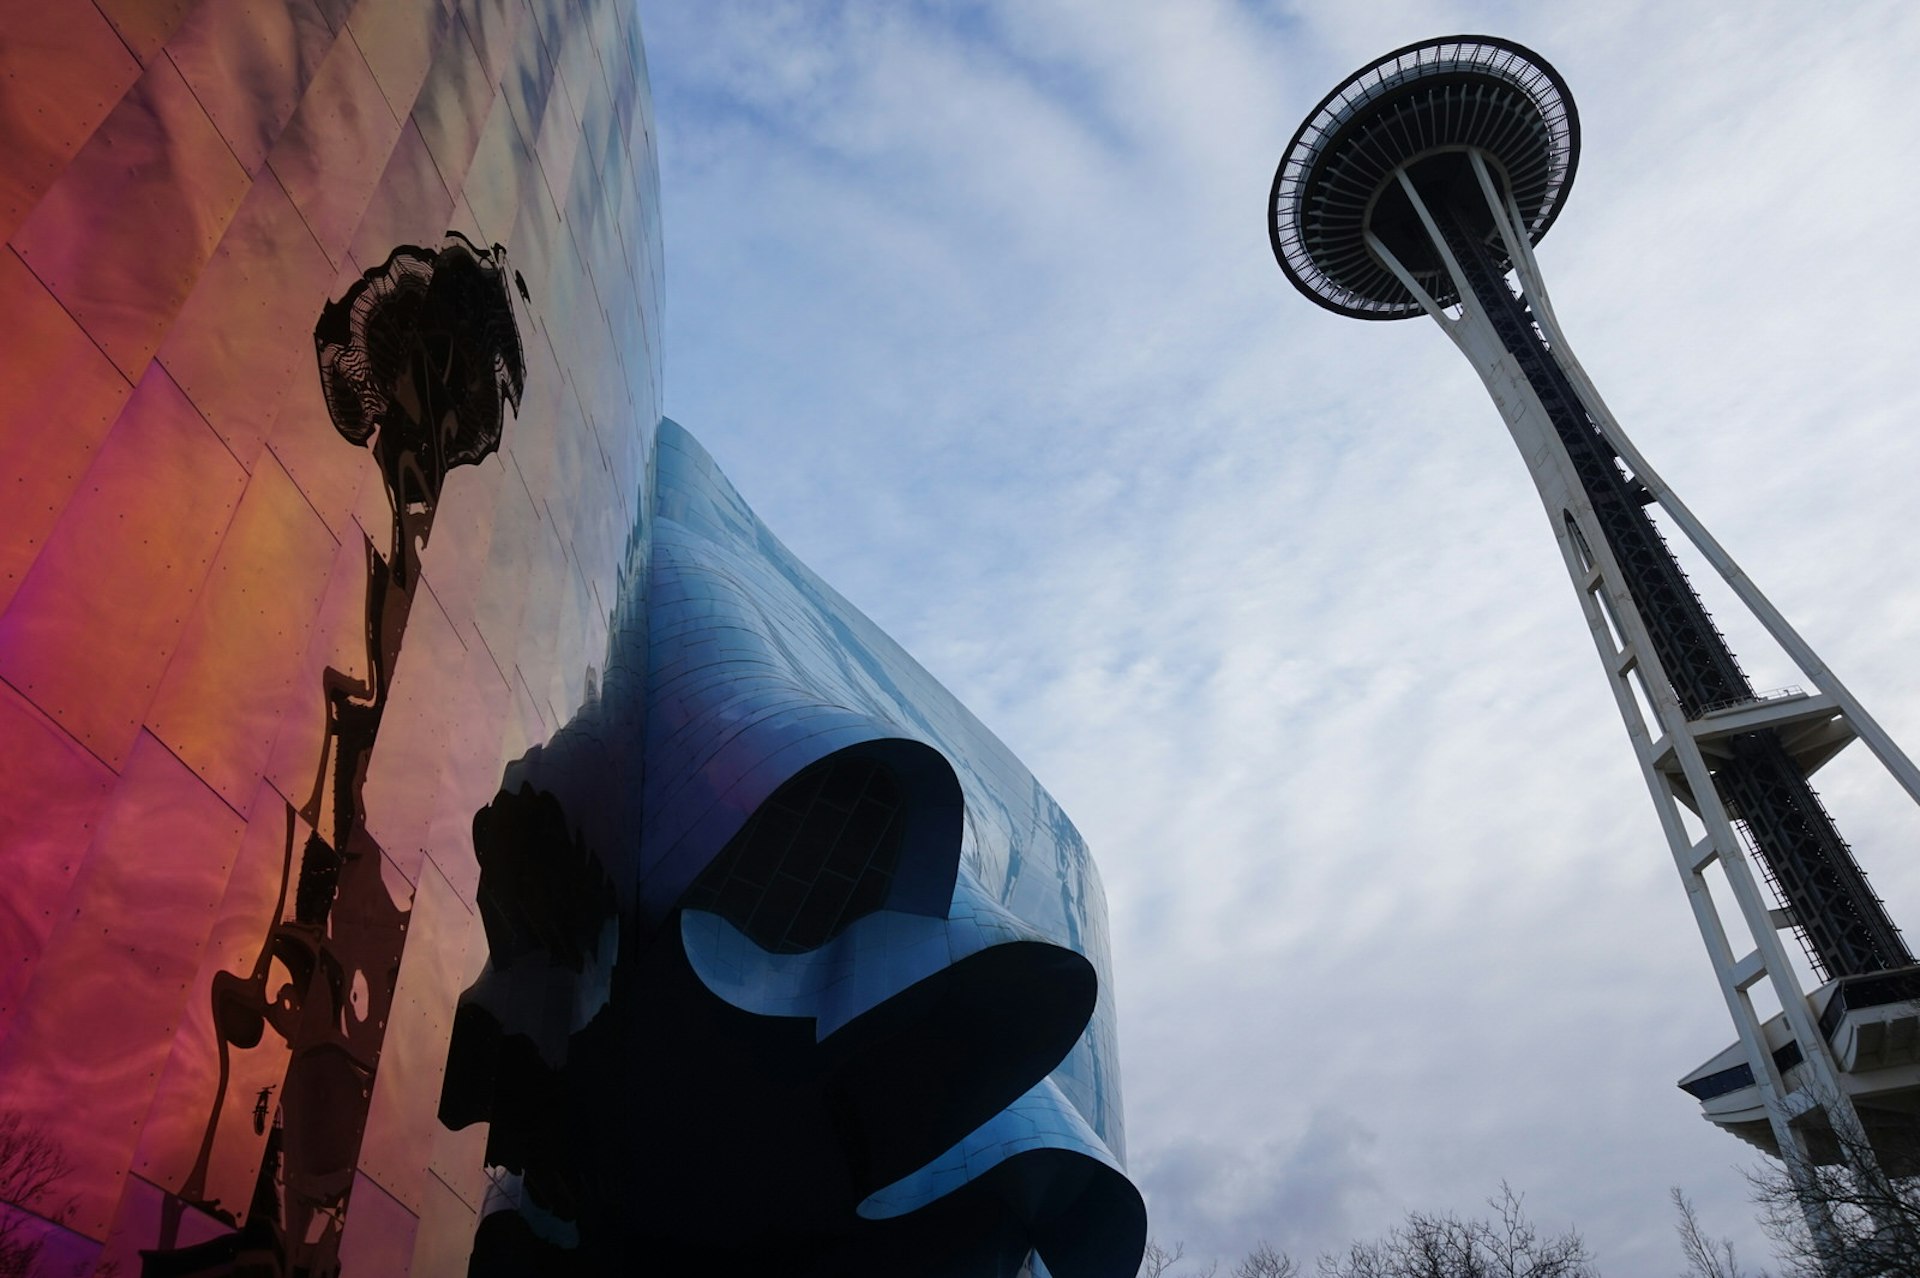 The landmark Space Needle tower in Seattle is seen on the right, and reflected in a red mirrored wall on the left © Brendan Sainsbury / Lonely Planet 